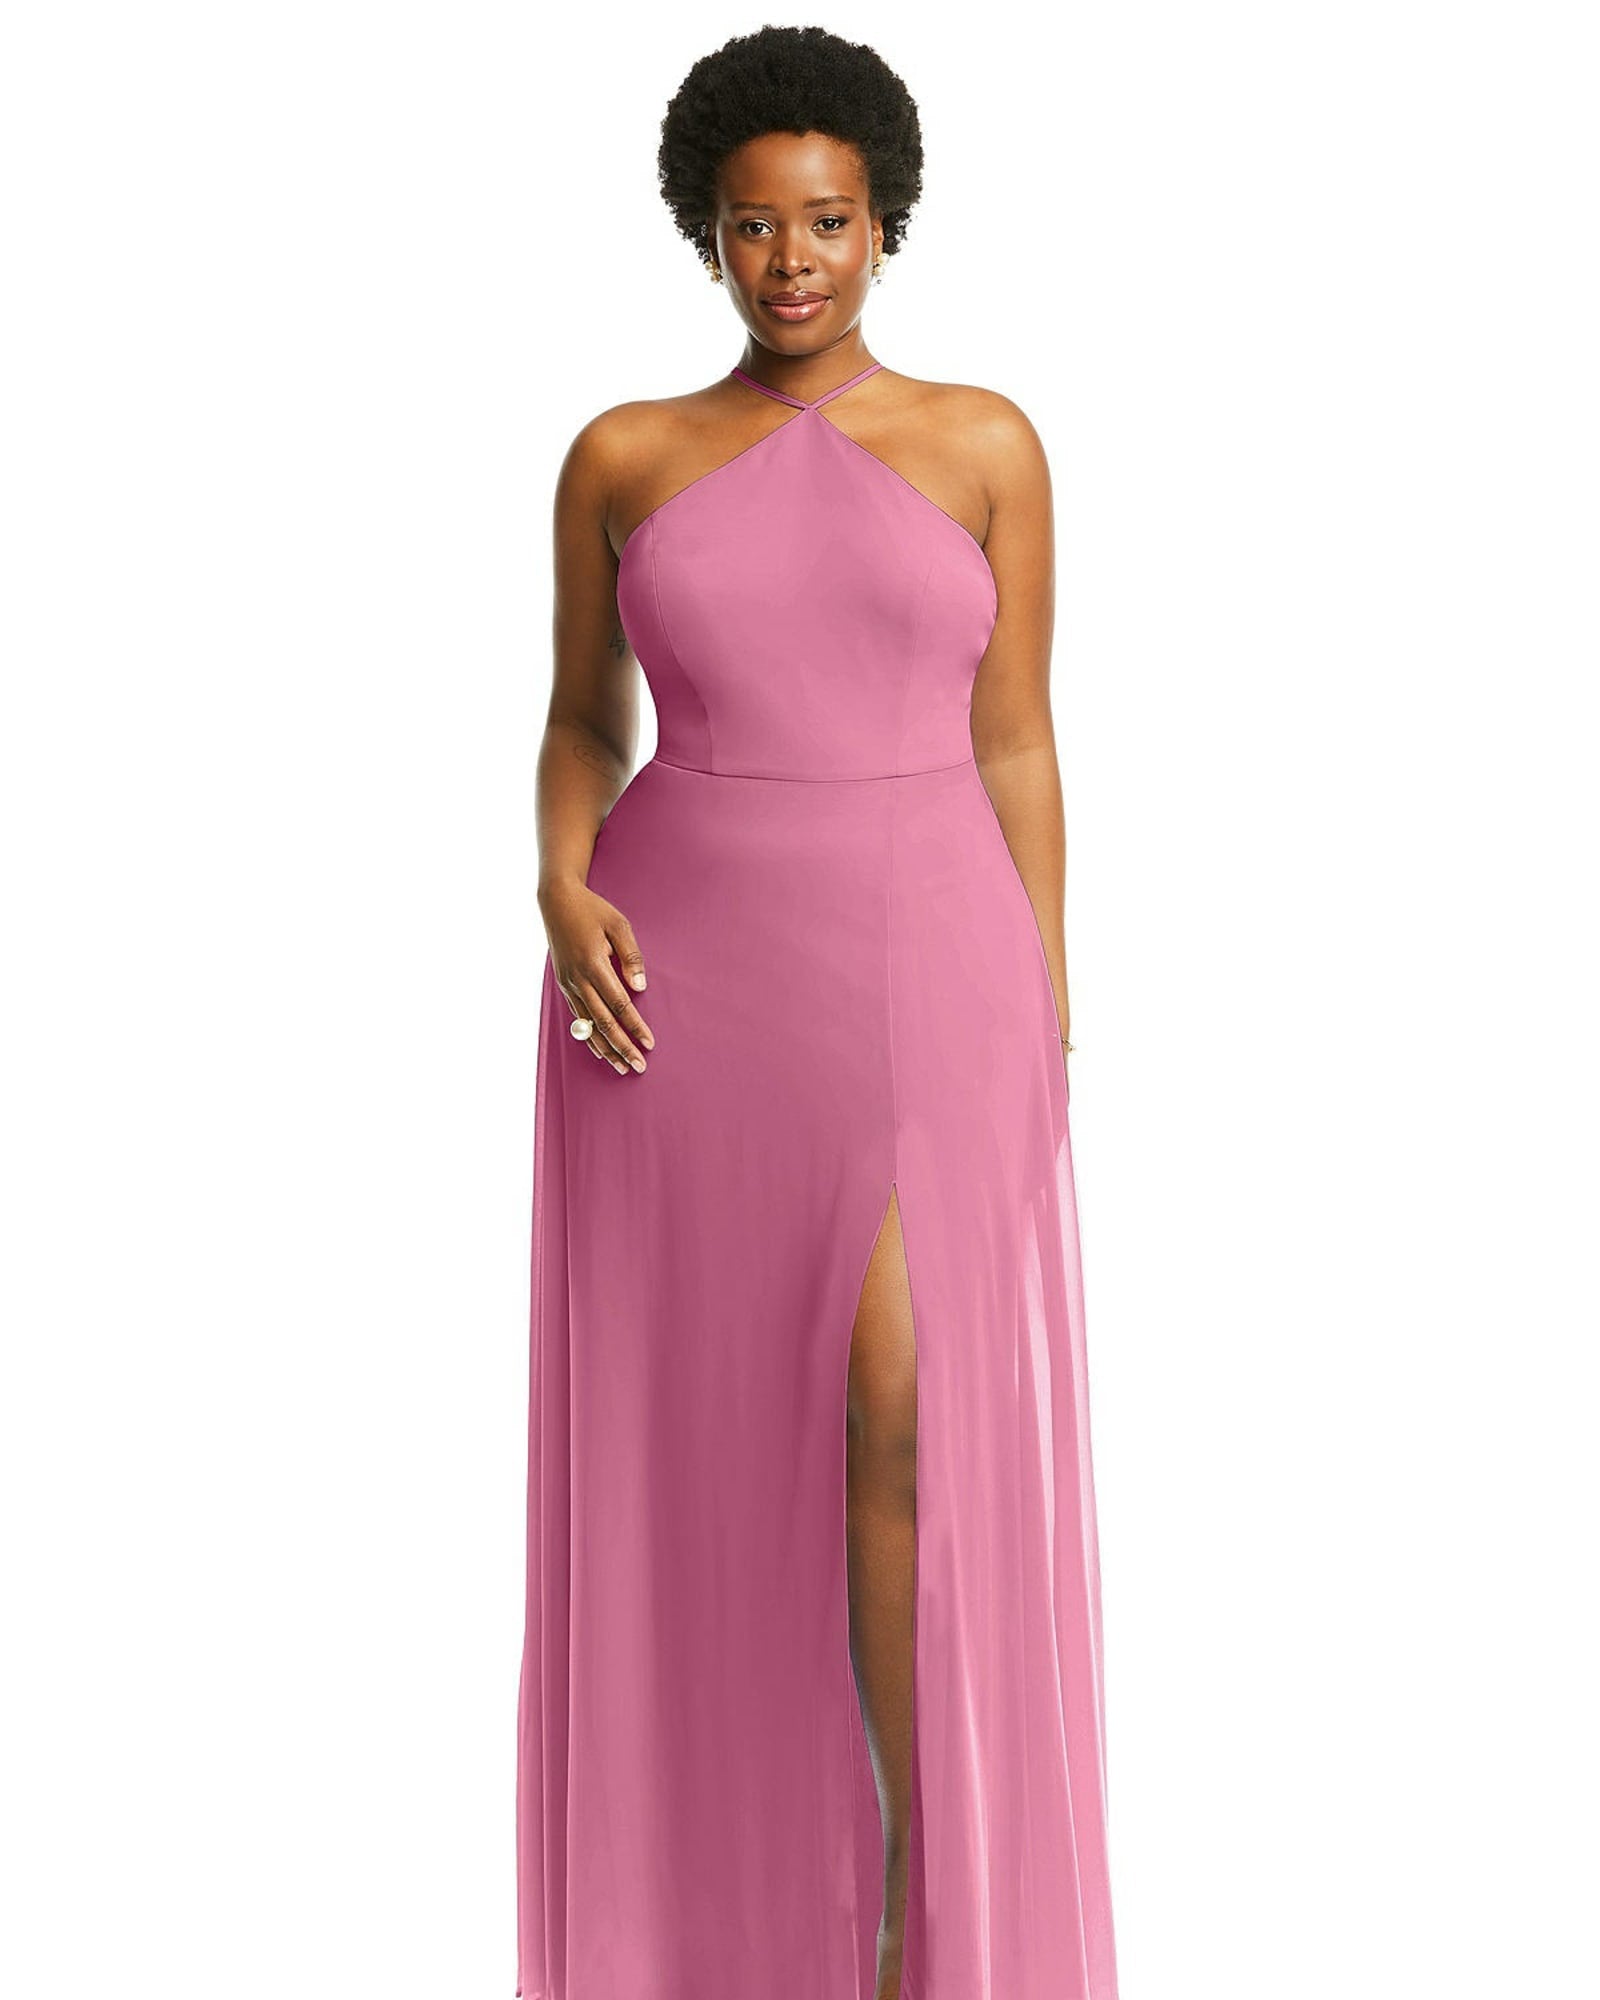 Diamond Halter Maxi Dress with Adjustable Straps | Orchid Pink